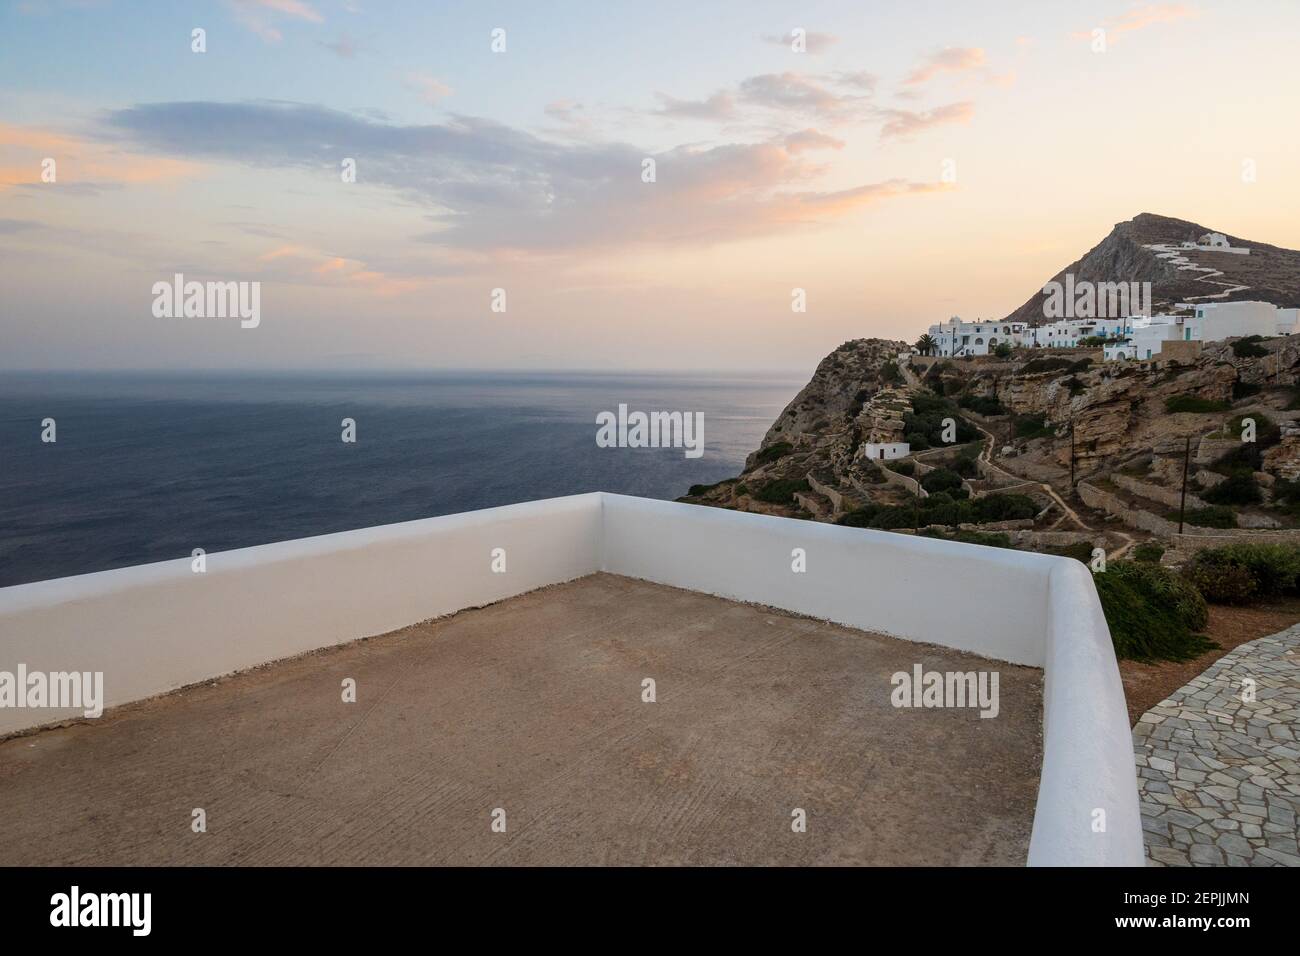 White terrace overlooking the Aegean Sea in Folegandros Island, Cyclades, Greece Stock Photo